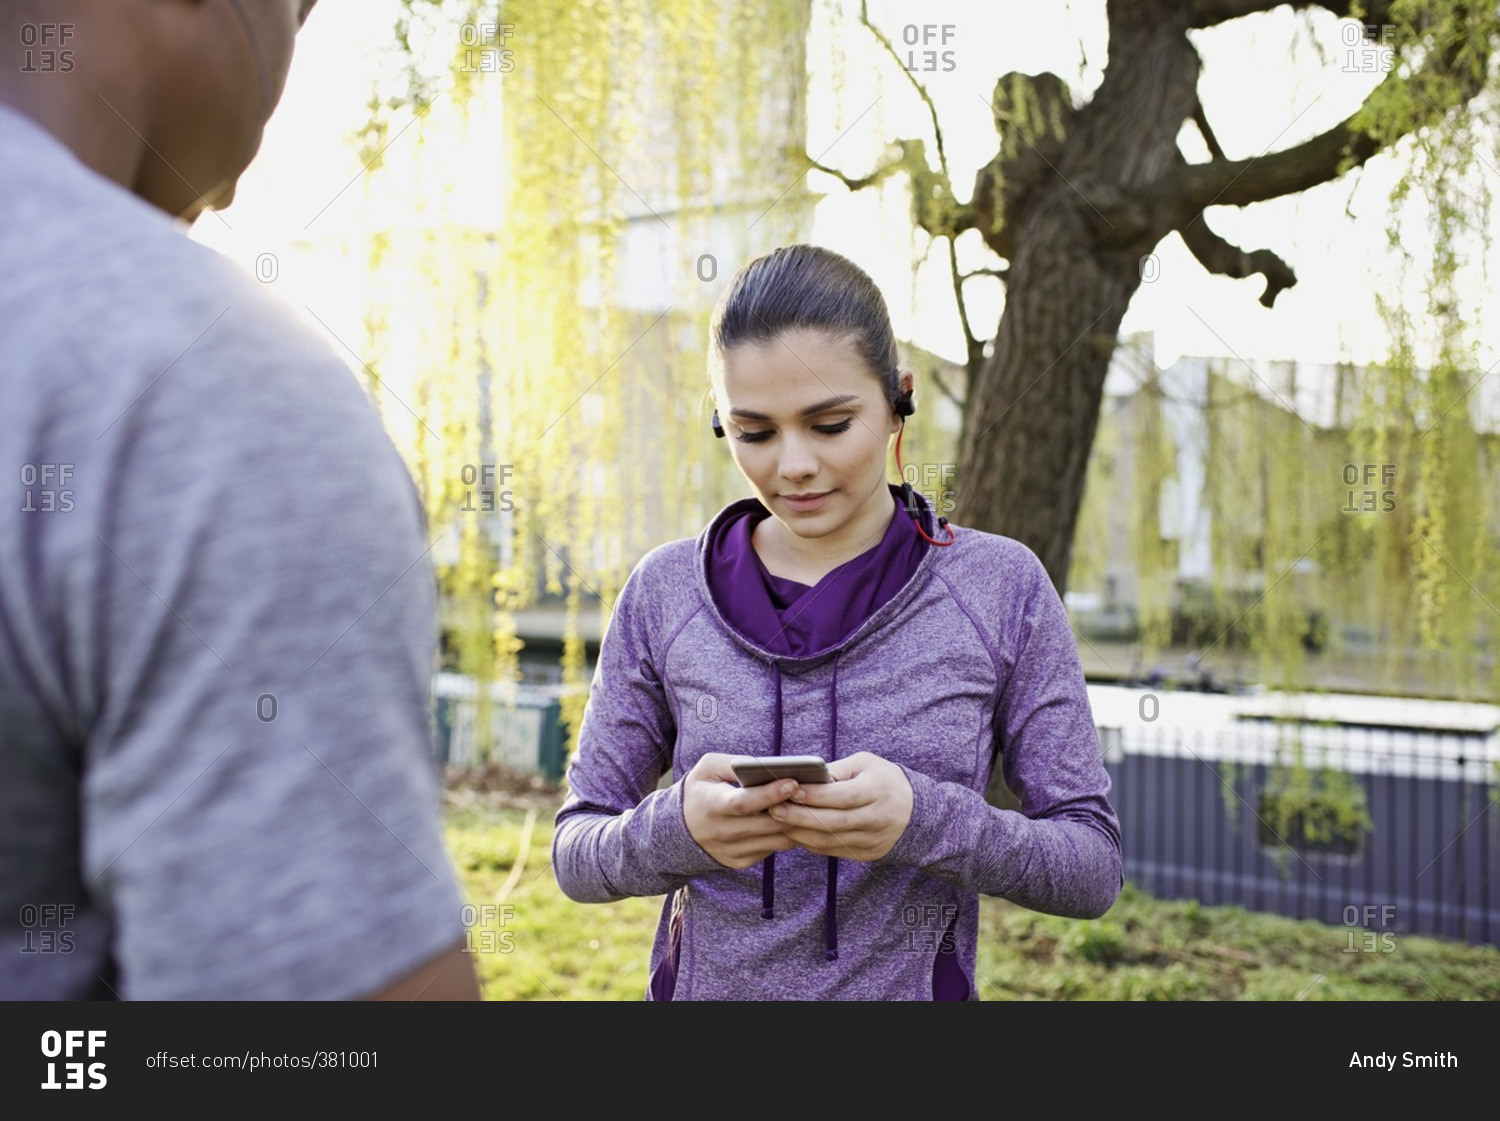 Woman checking her smartphone during a workout